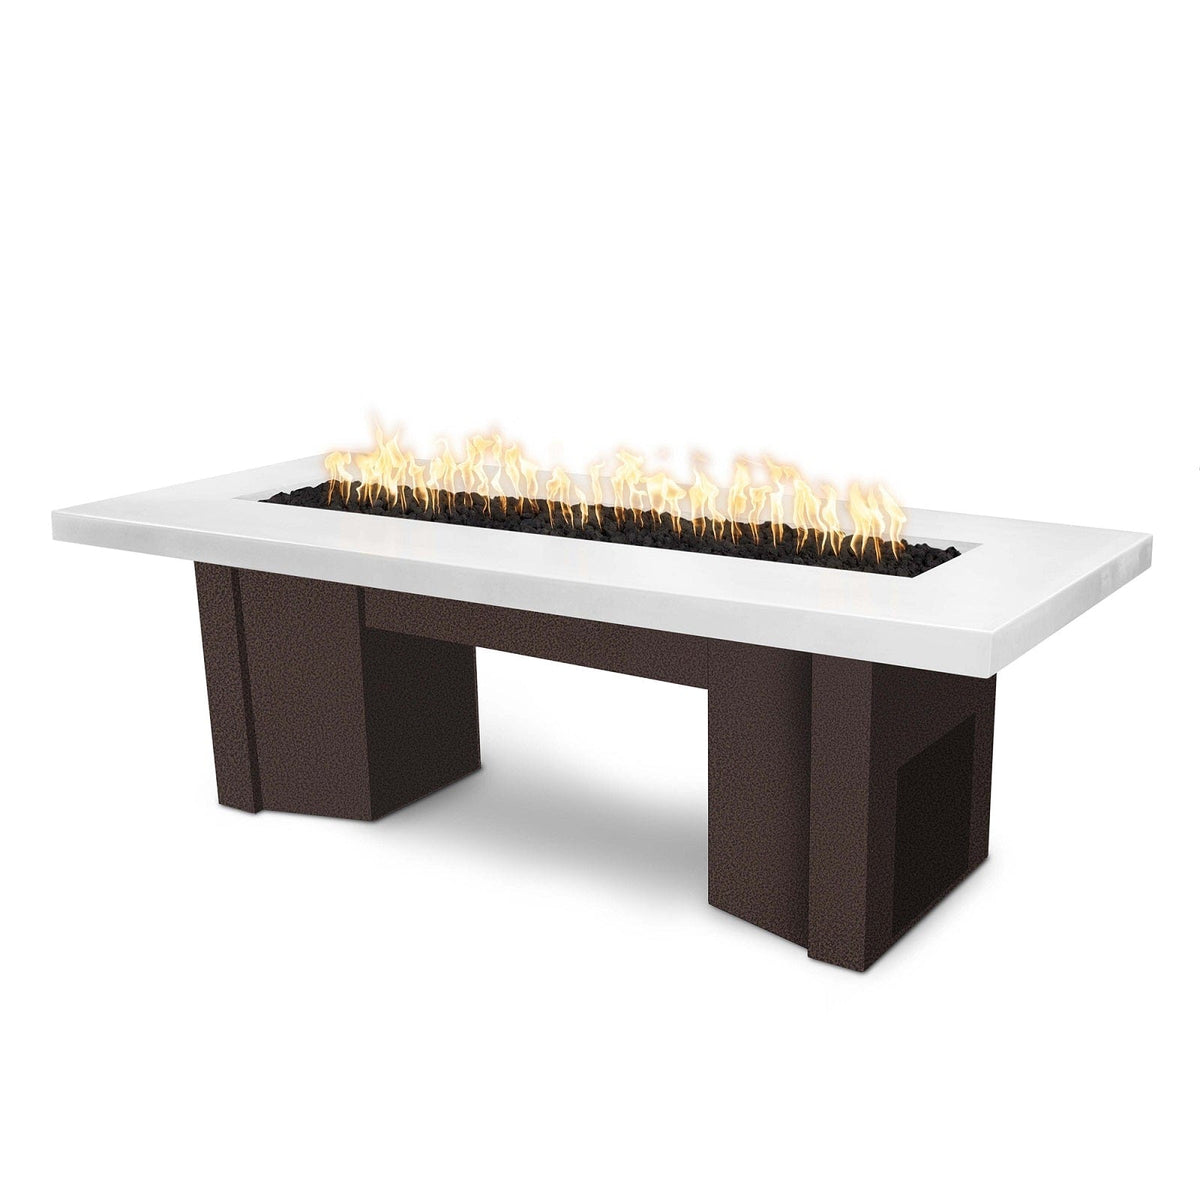 The Outdoor Plus Fire Features Limestone (-LIM) / Copper Vein Powder Coated Steel (-CPV) The Outdoor Plus 78&quot; Alameda Fire Table Smooth Concrete in Natural Gas - Match Lit with Flame Sense System / OPT-ALMGFRC78FSML-NG